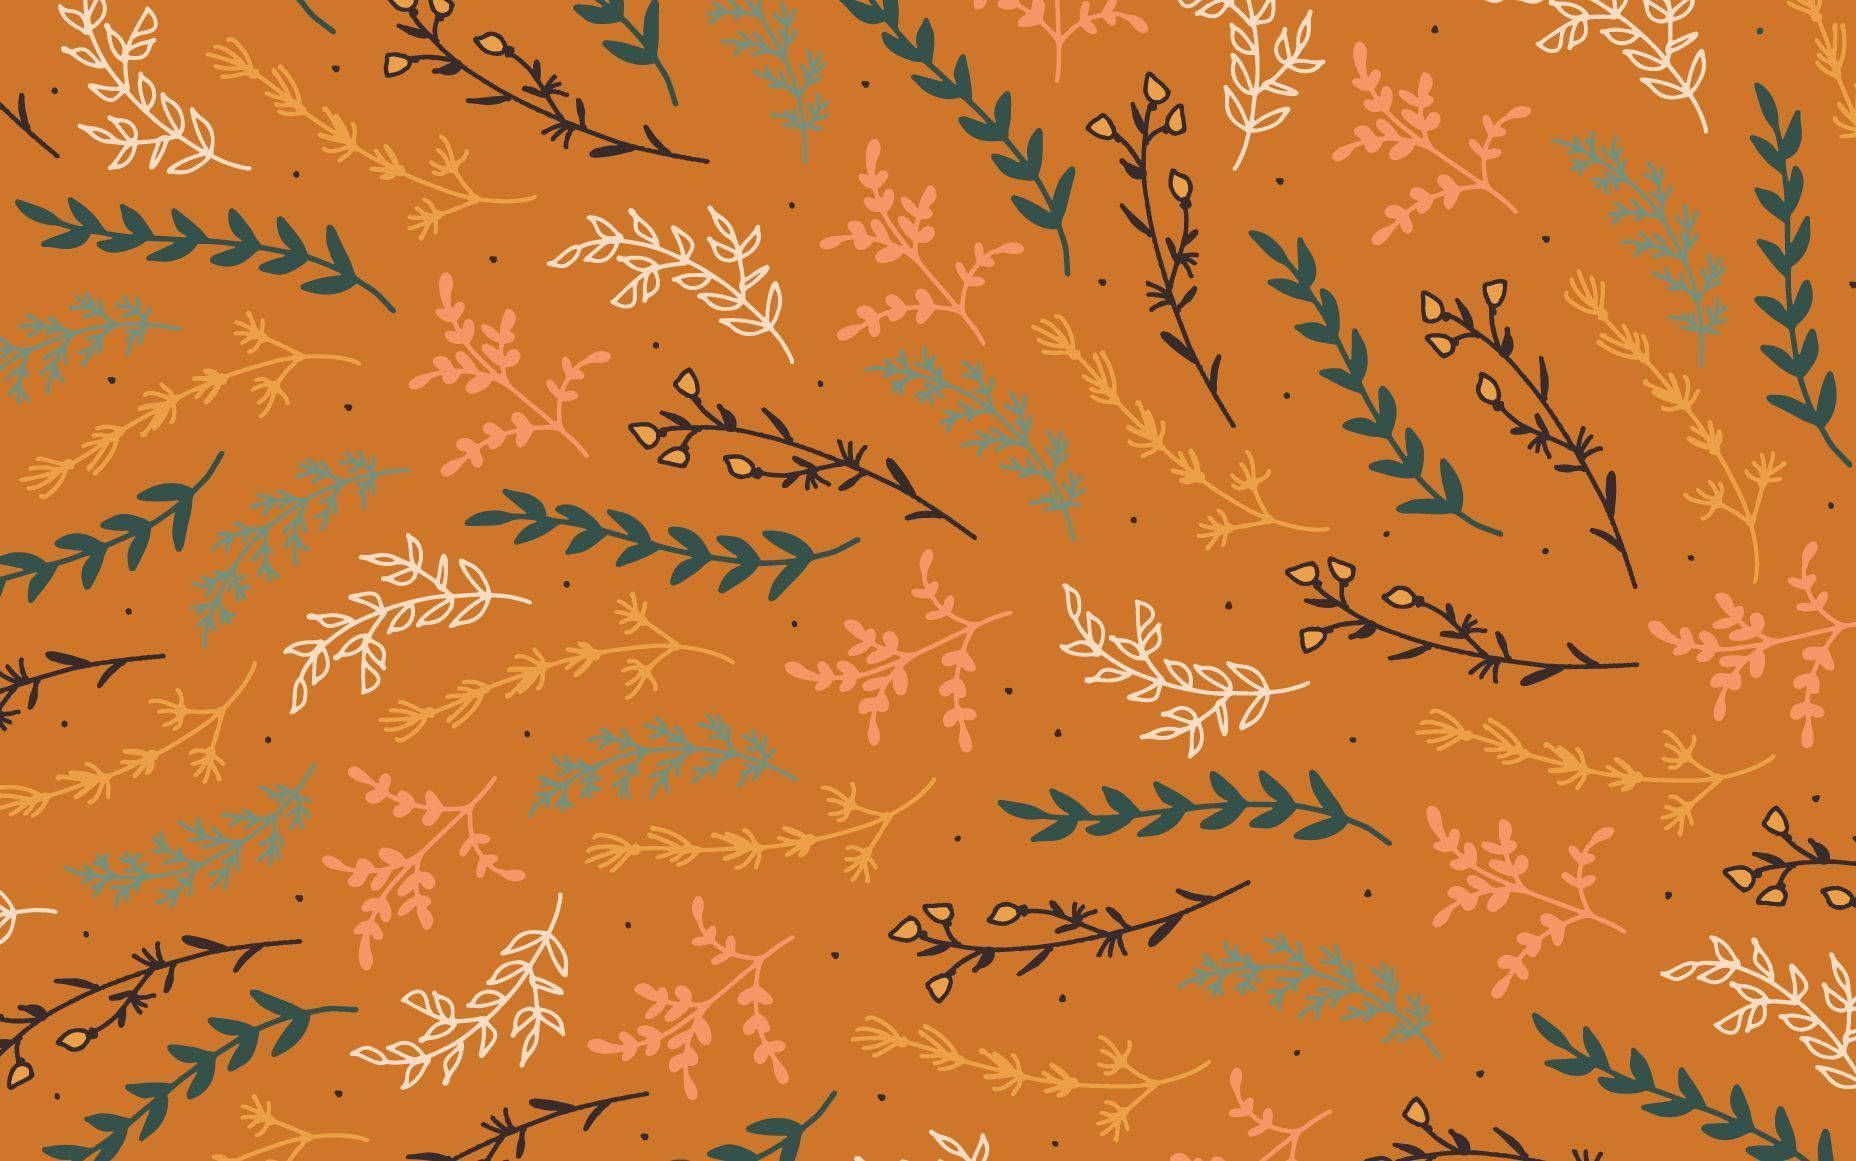 A pattern of leaves and flowers on an orange background - October, pattern